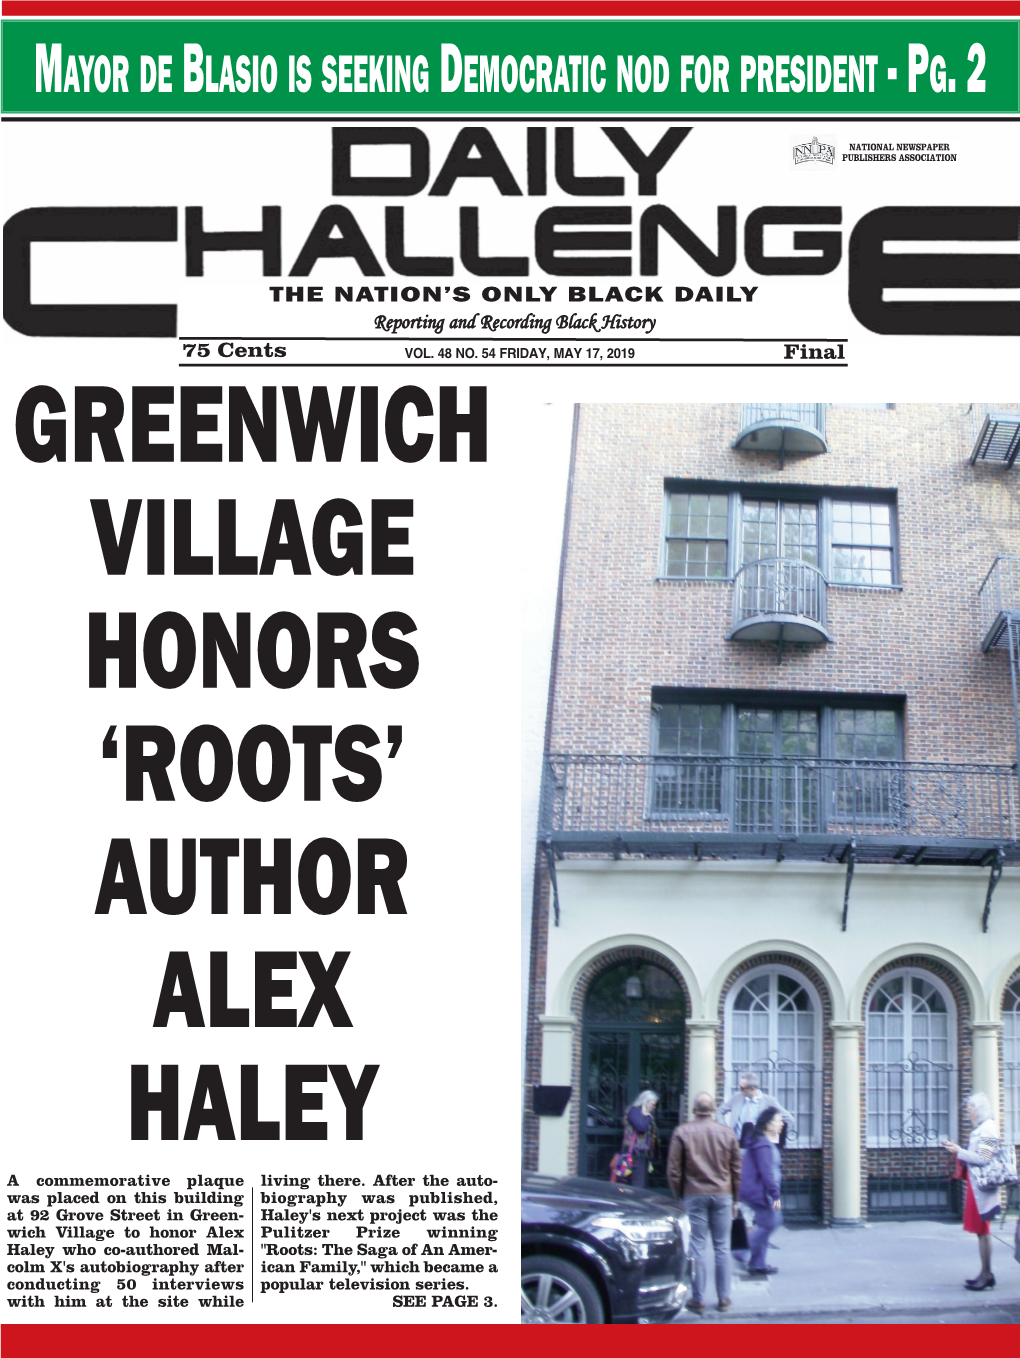 Author Alex Haley on a Greenwich Village Building American History,” She Said